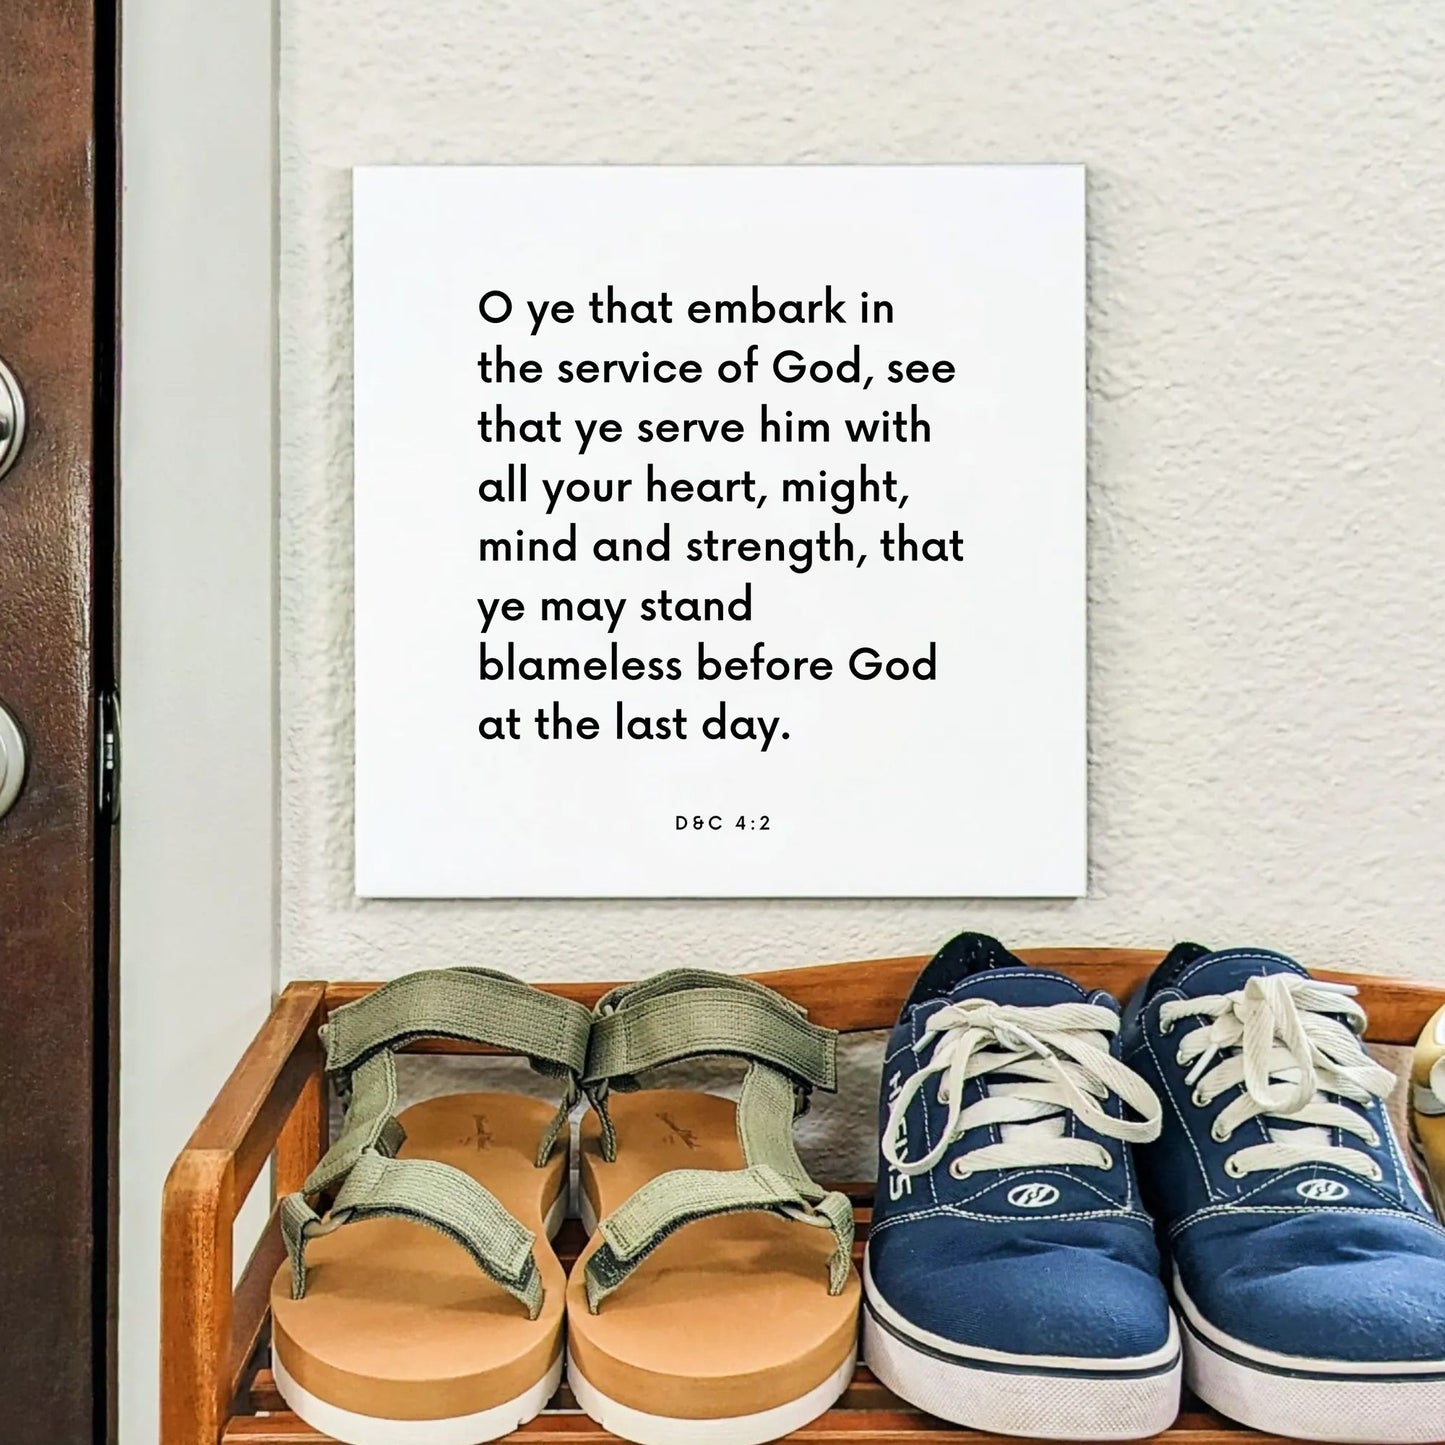 Shoes mouting of the scripture tile for D&C 4:2 - "O ye that embark in the service of God"